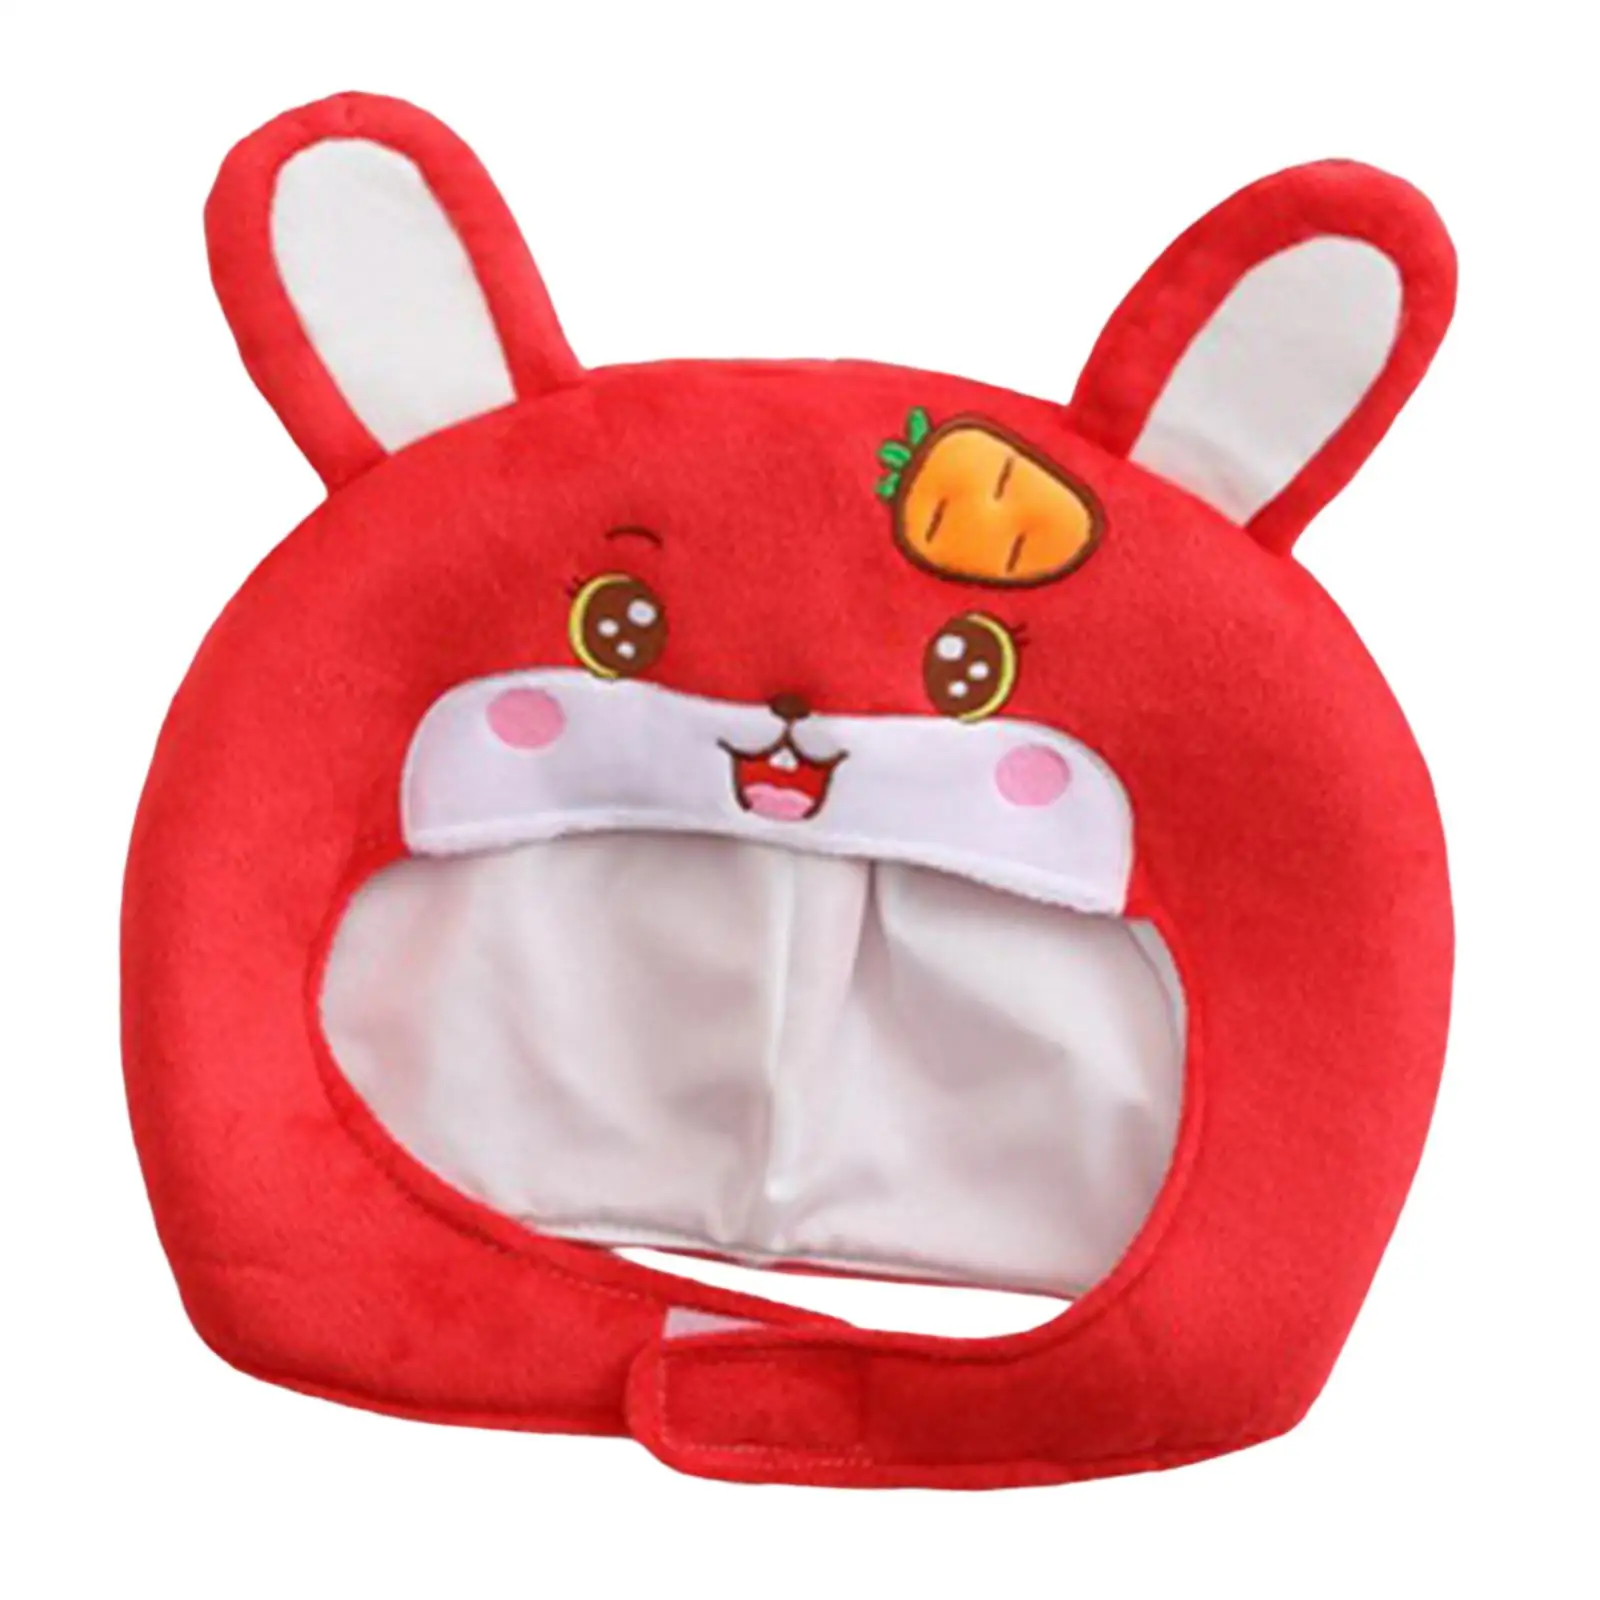 Plush Rabbit Ear Hat Lightweight Headband for Party Supplies Holidays Cosplay Stage Performance